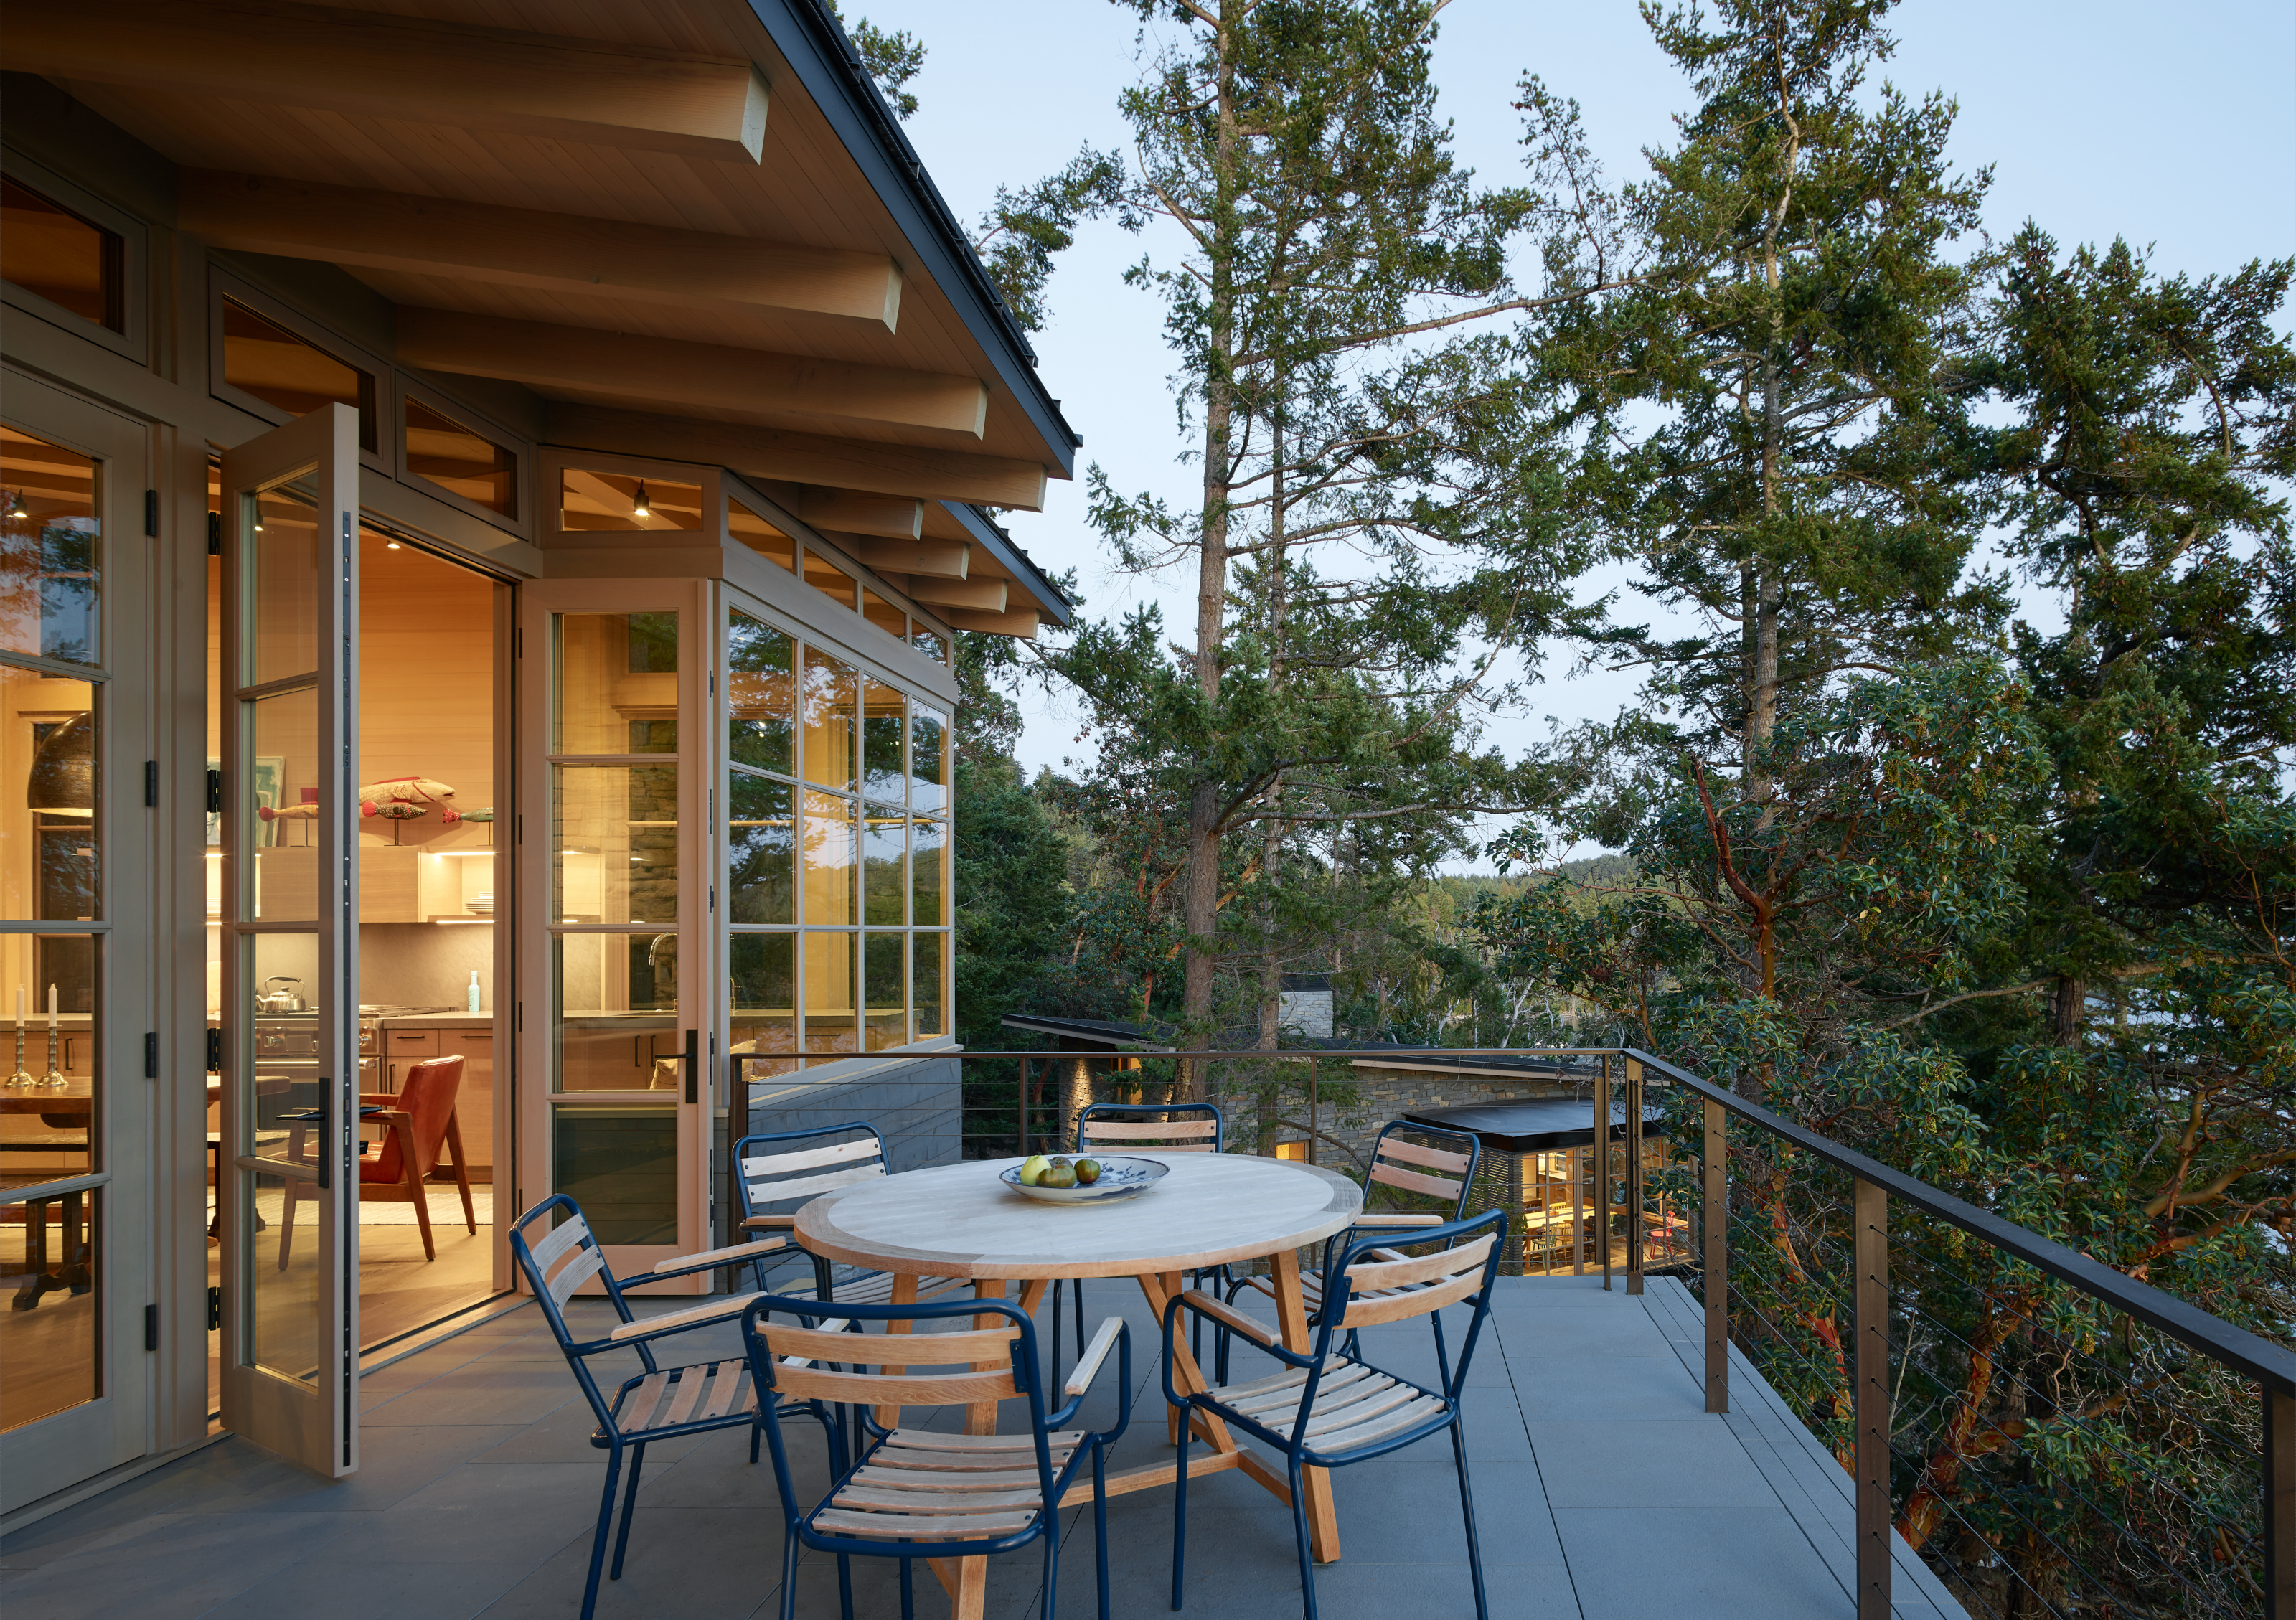 A spacious balcony outside the kitchen, perfect for outdoor dining, with a view of the guest house in the background, creating a serene outdoor living space.